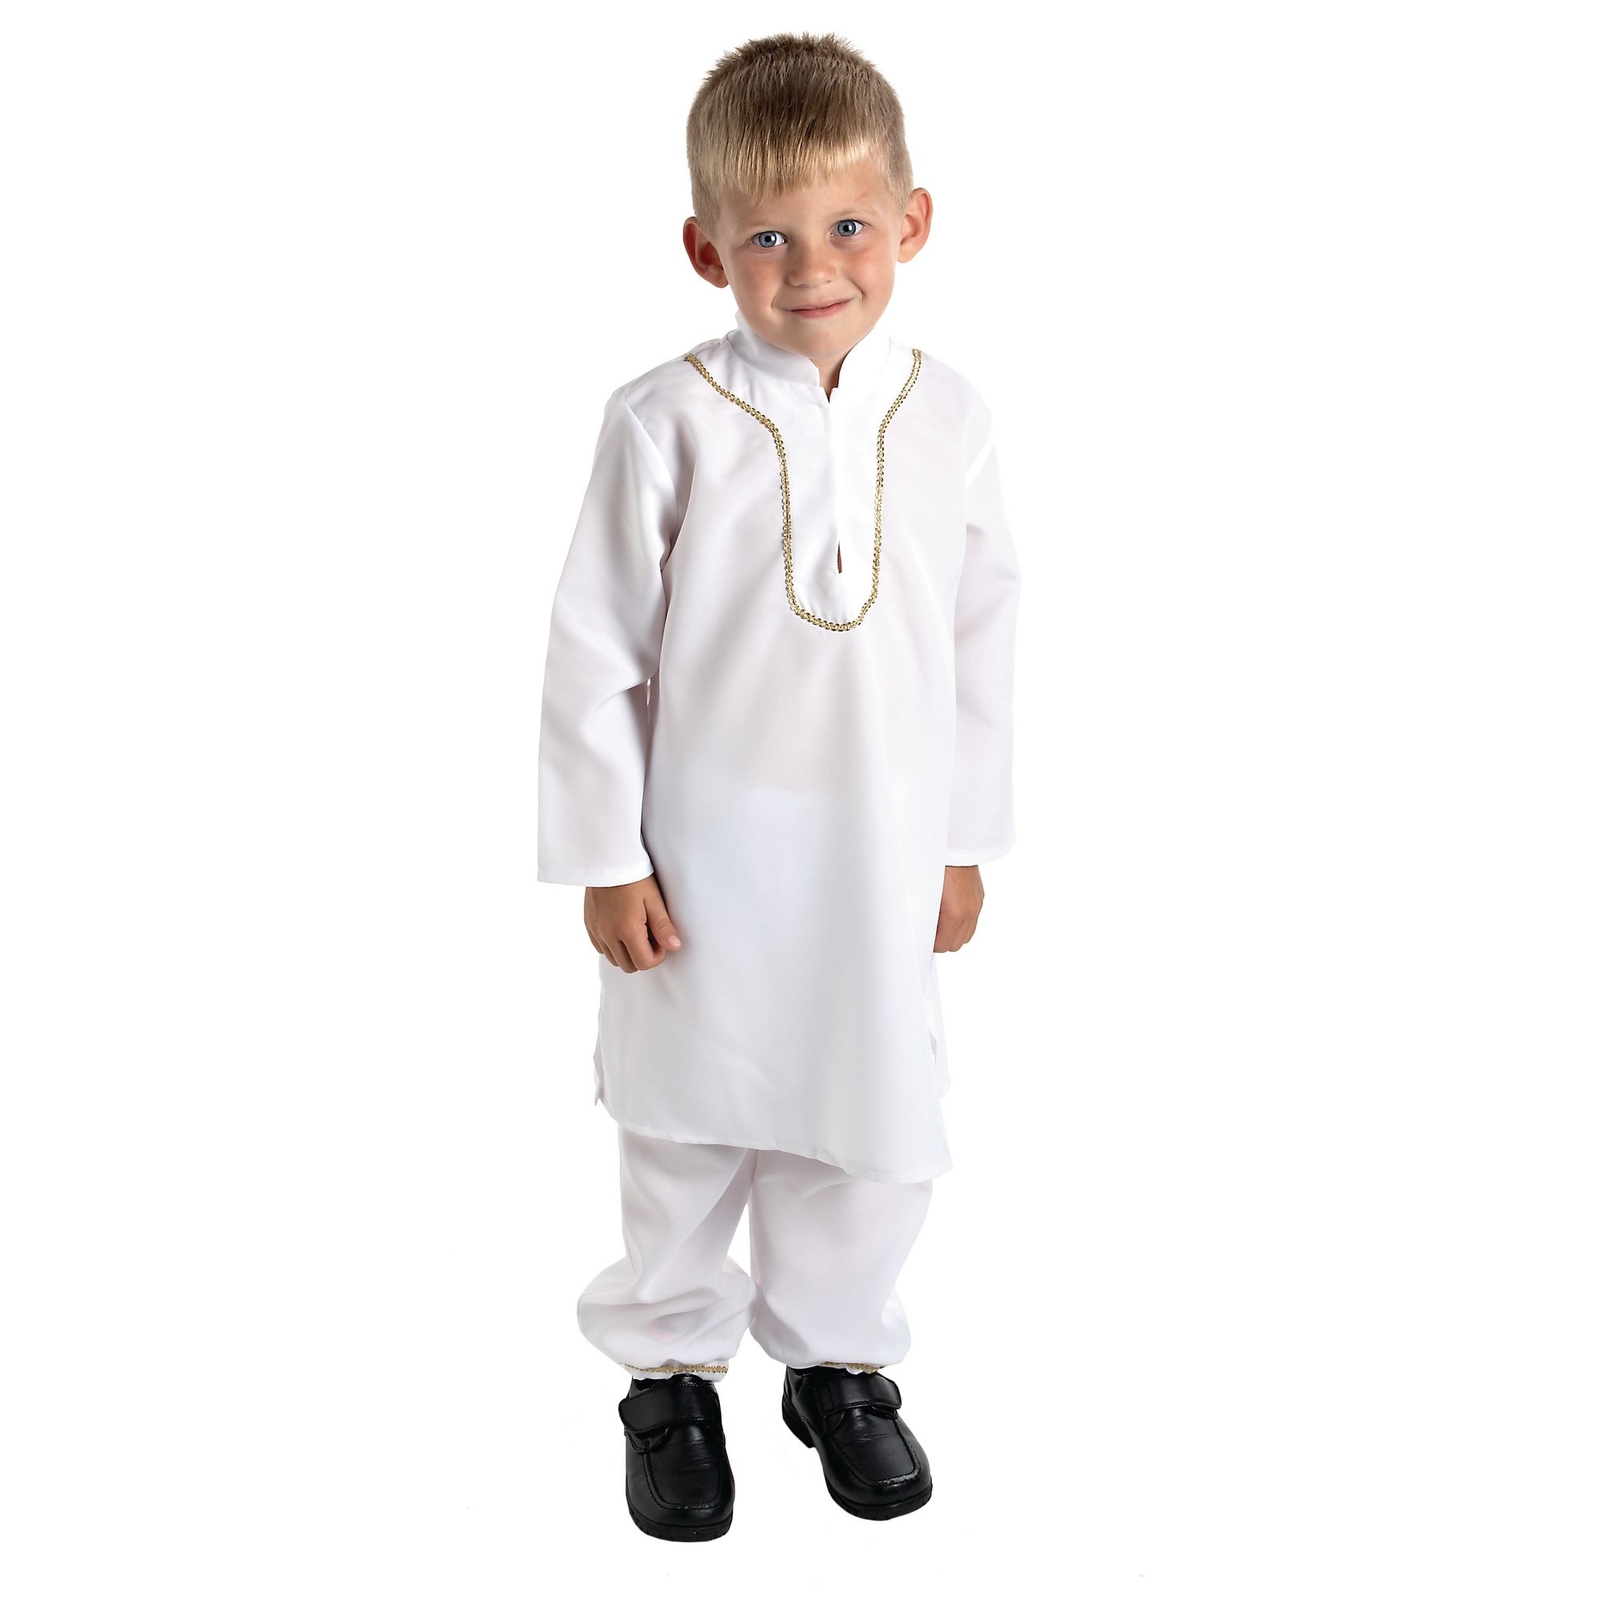 Multicultural Costume - White Tunic with Harem Trousers - 3-5 Years - Per Set